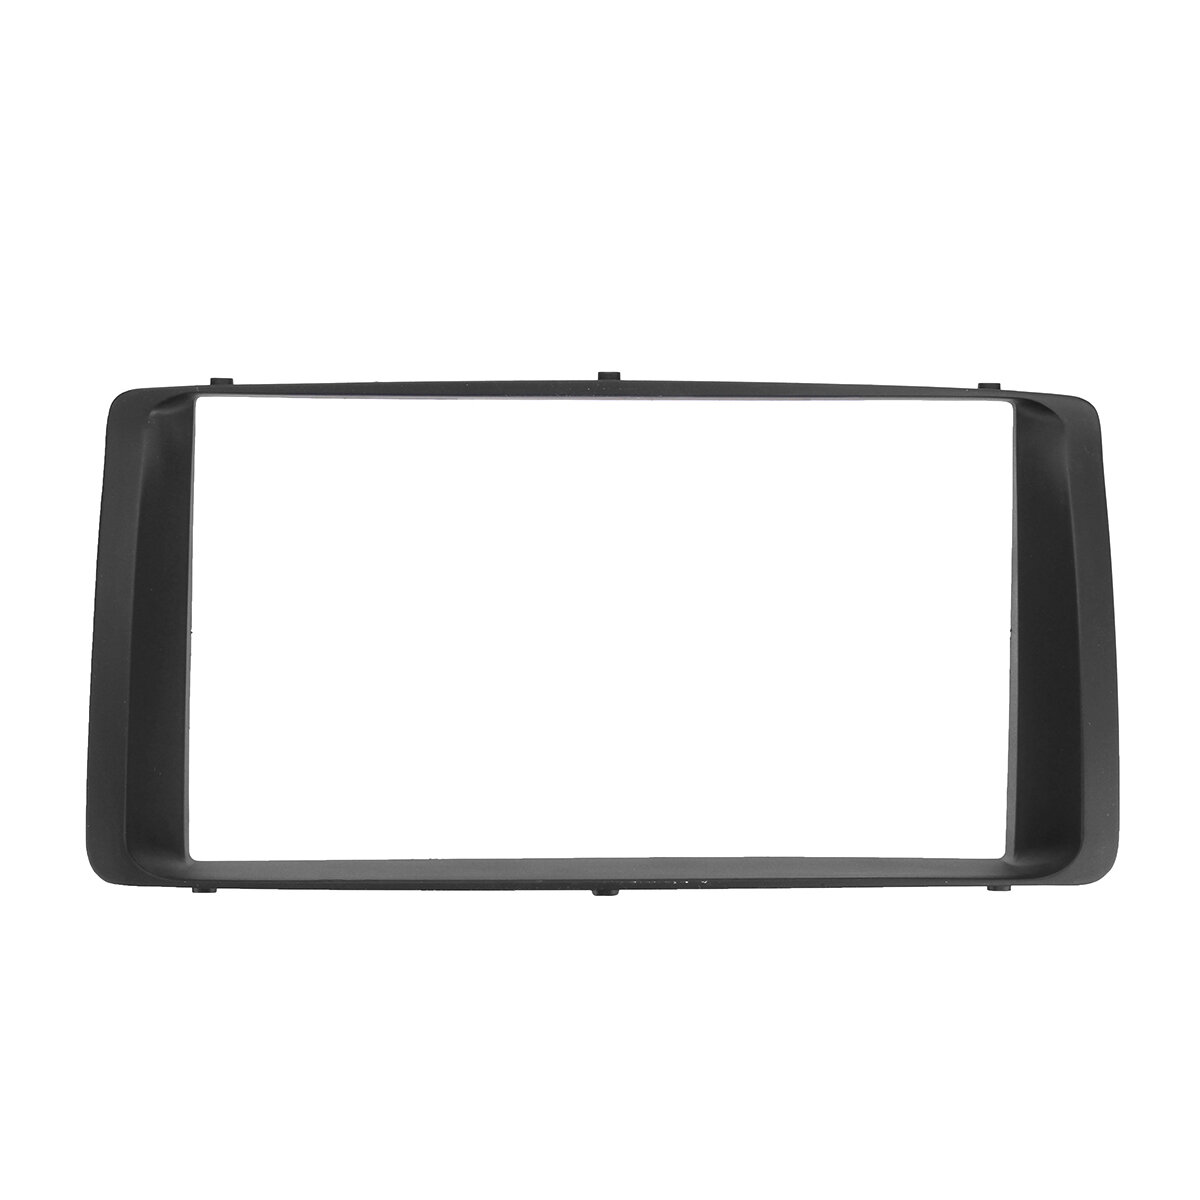 2 pins Car Stereo Panel Frame voor Toyota Corolla 2003-2006